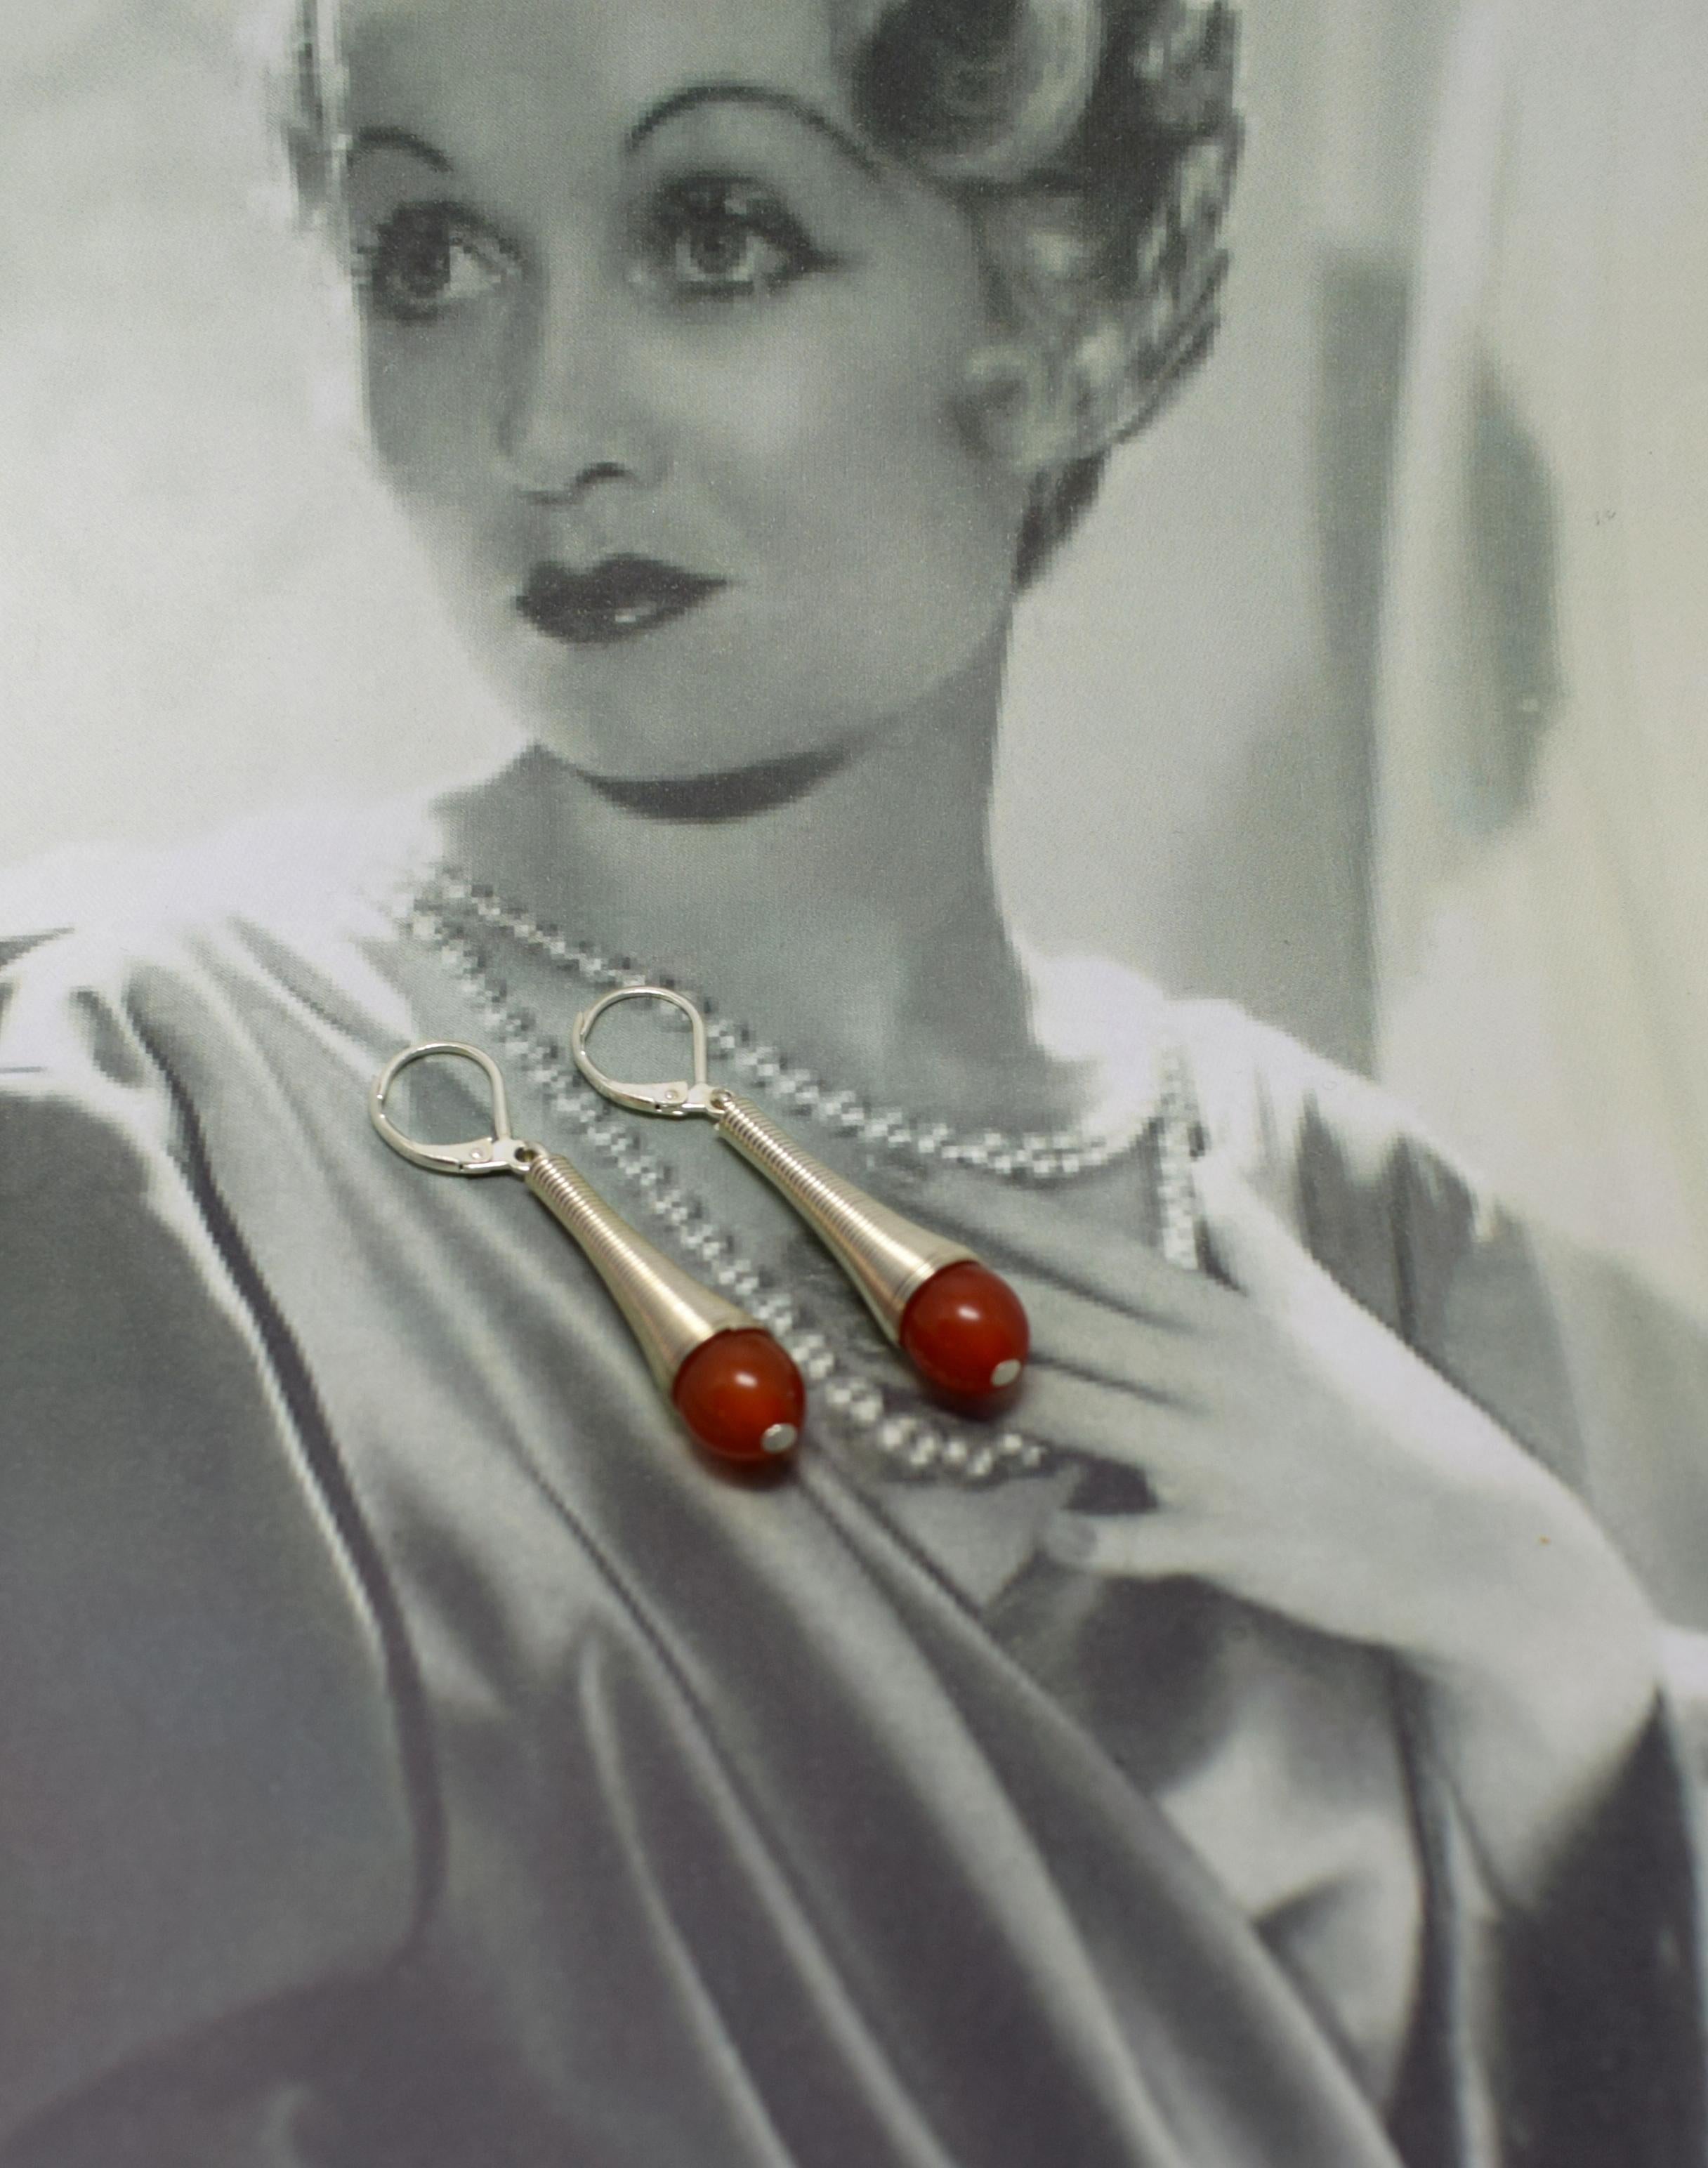 Fabulously stylish 1930's Art Deco modernist earrings. The phenolic bakelite is tomato red colour. The chromed metal is bright and crisp with no tarnishing or pitting. Lovely length when worn and ideal for day or evening wear. European Art Deco